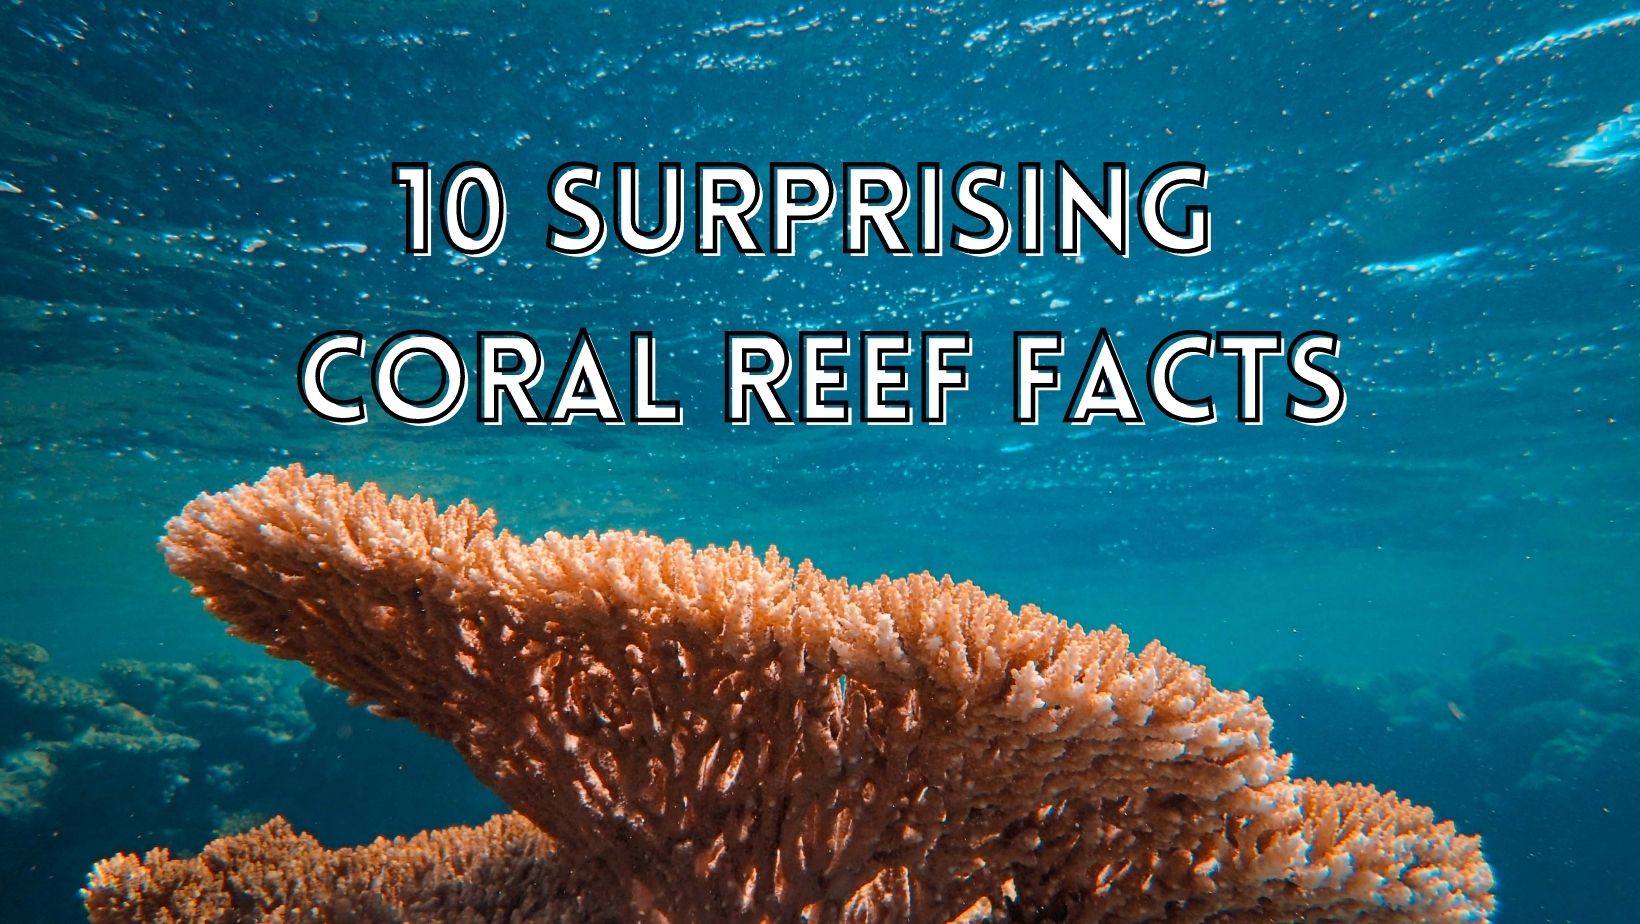 Surprising coral reef facts